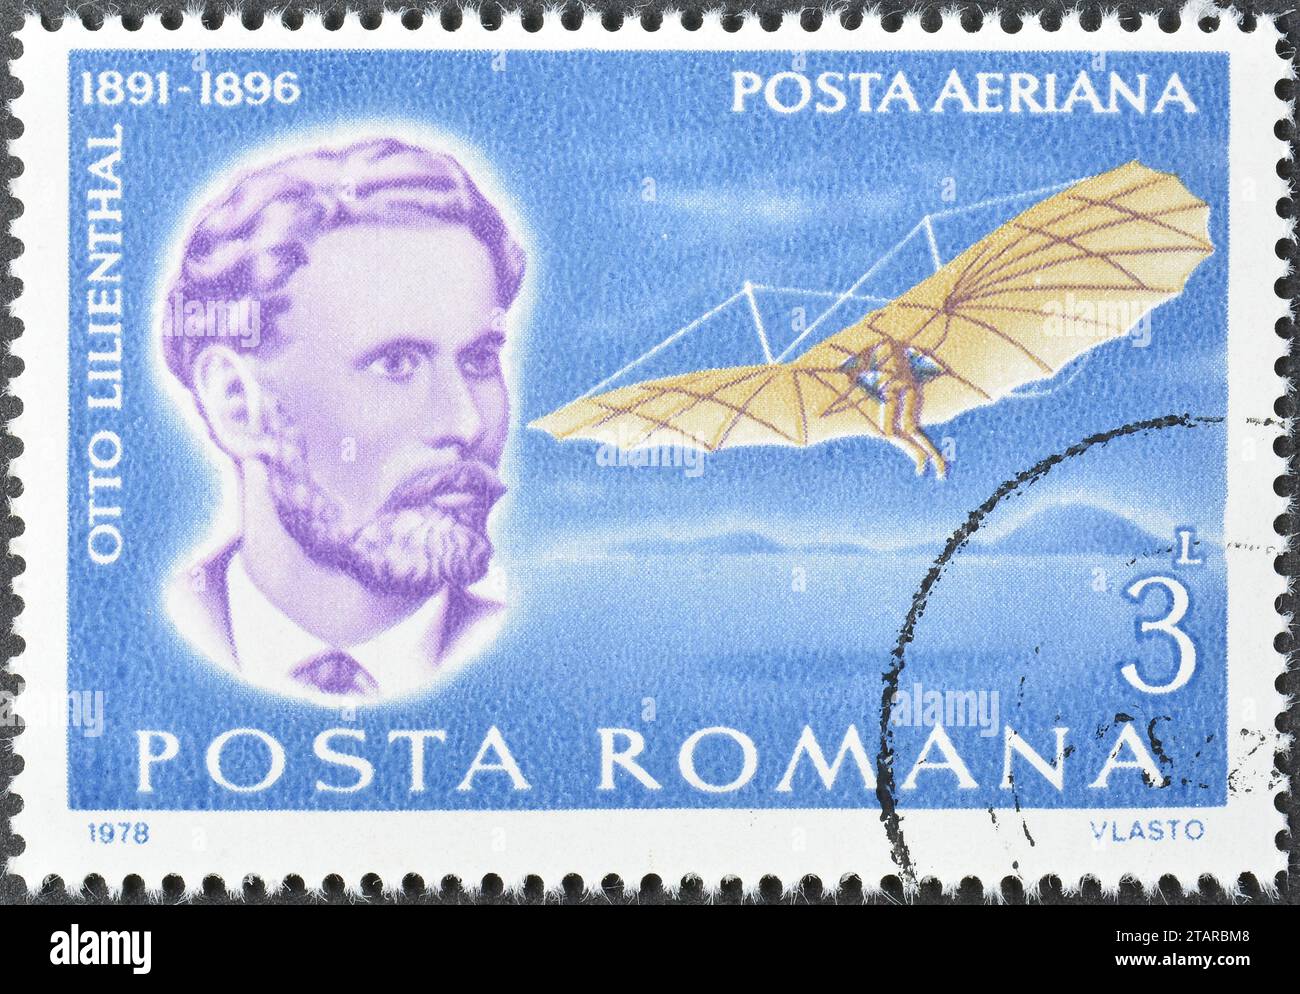 Cancelled postage stamp printed by Romania, that shows Otto Lilienthal (1891-1896), Pioneers of Aviation, circa 1978. Stock Photo